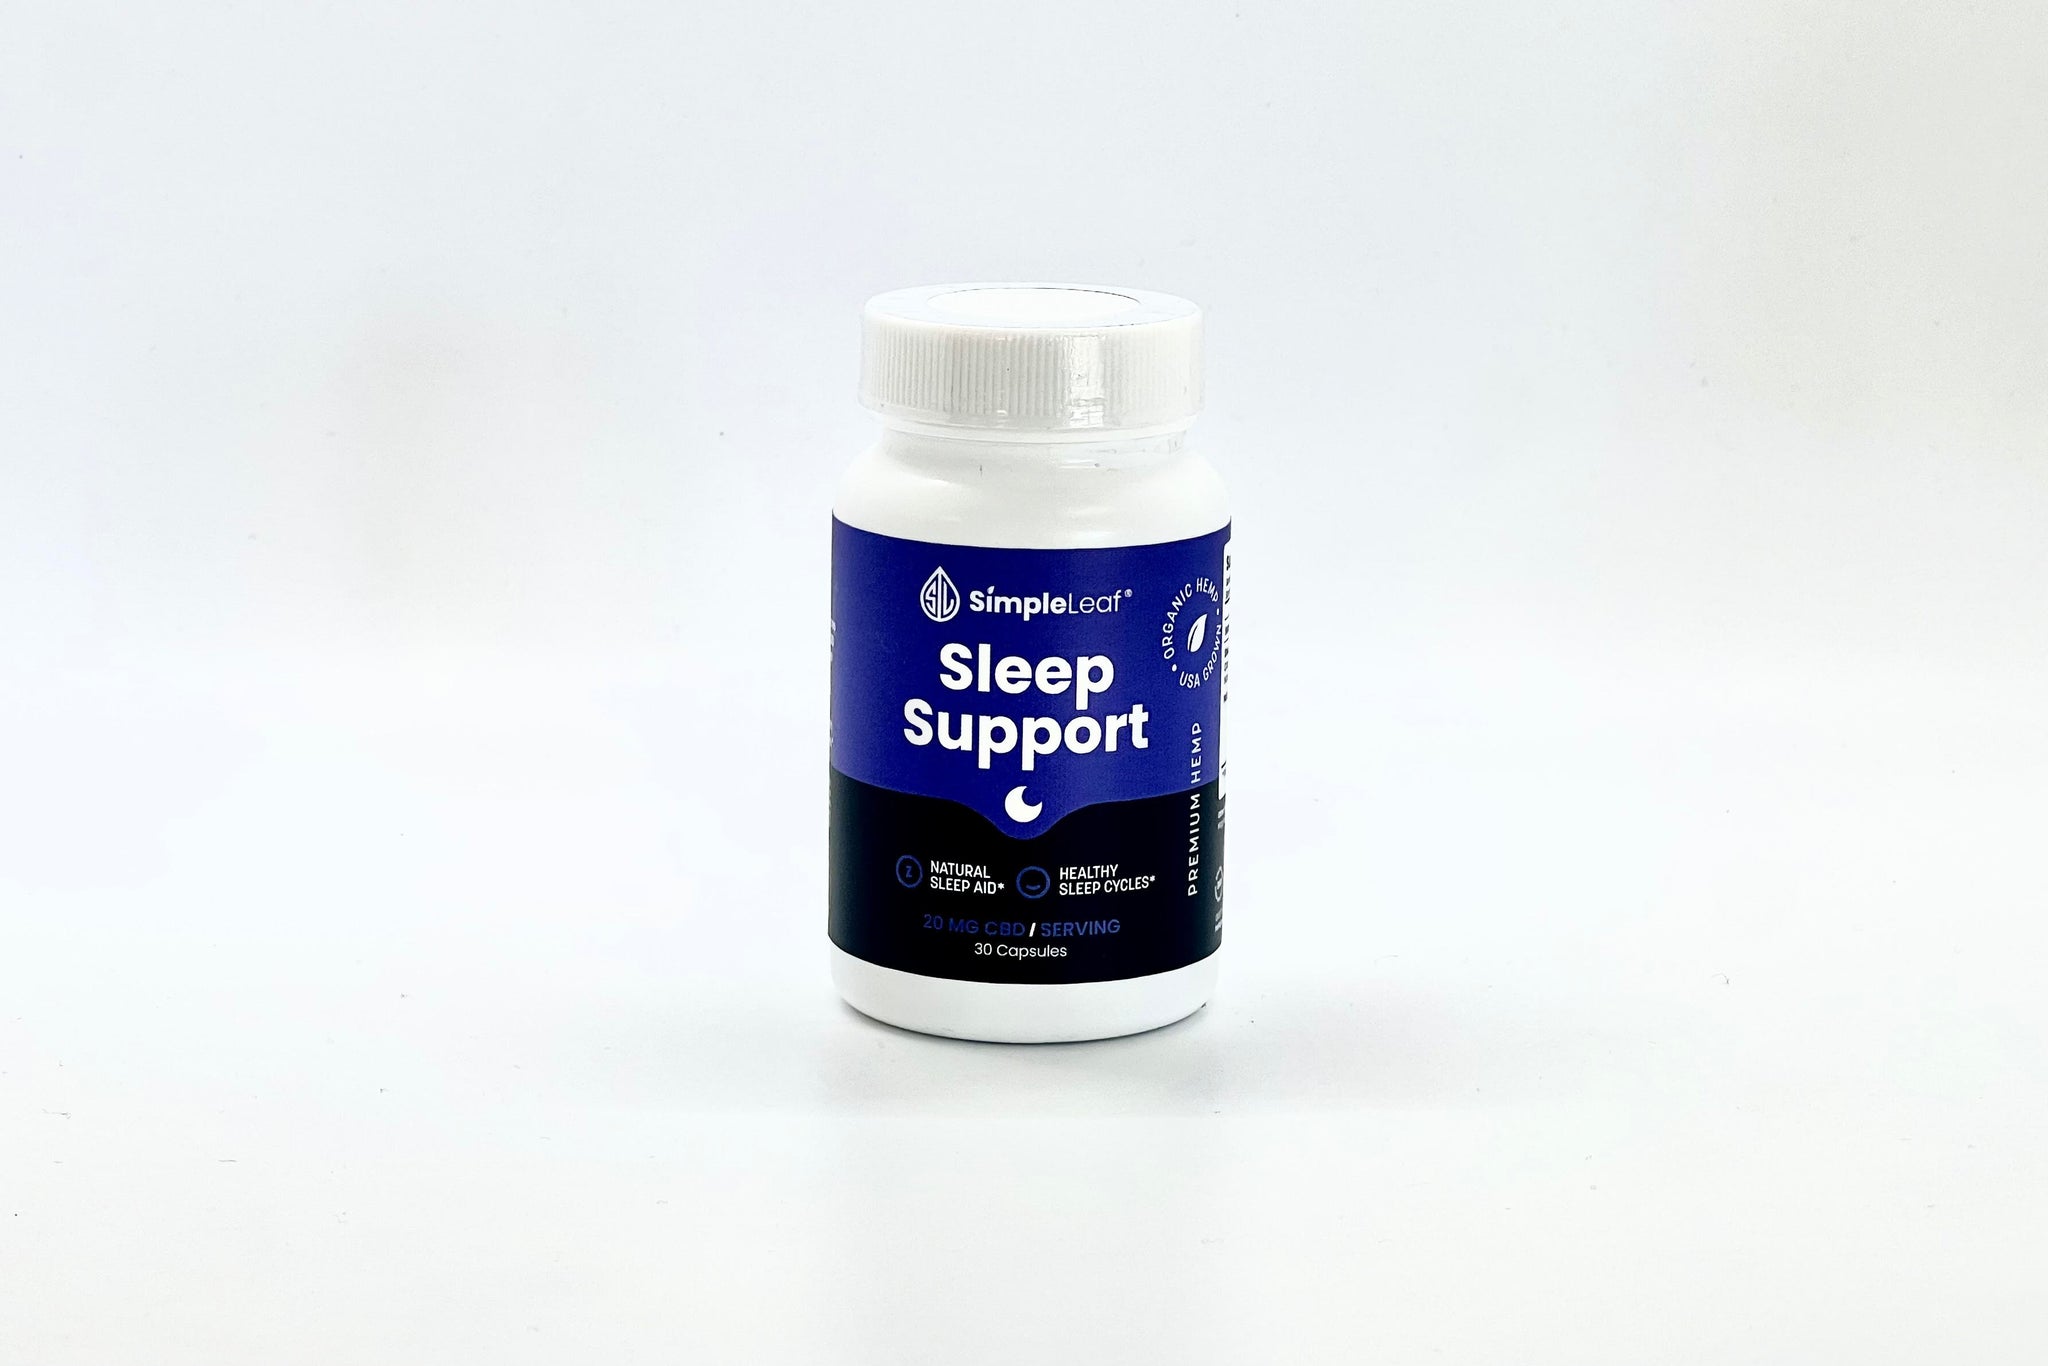 Simple Leaf Sleep Support Capsules (600mg, 30-day Supply)